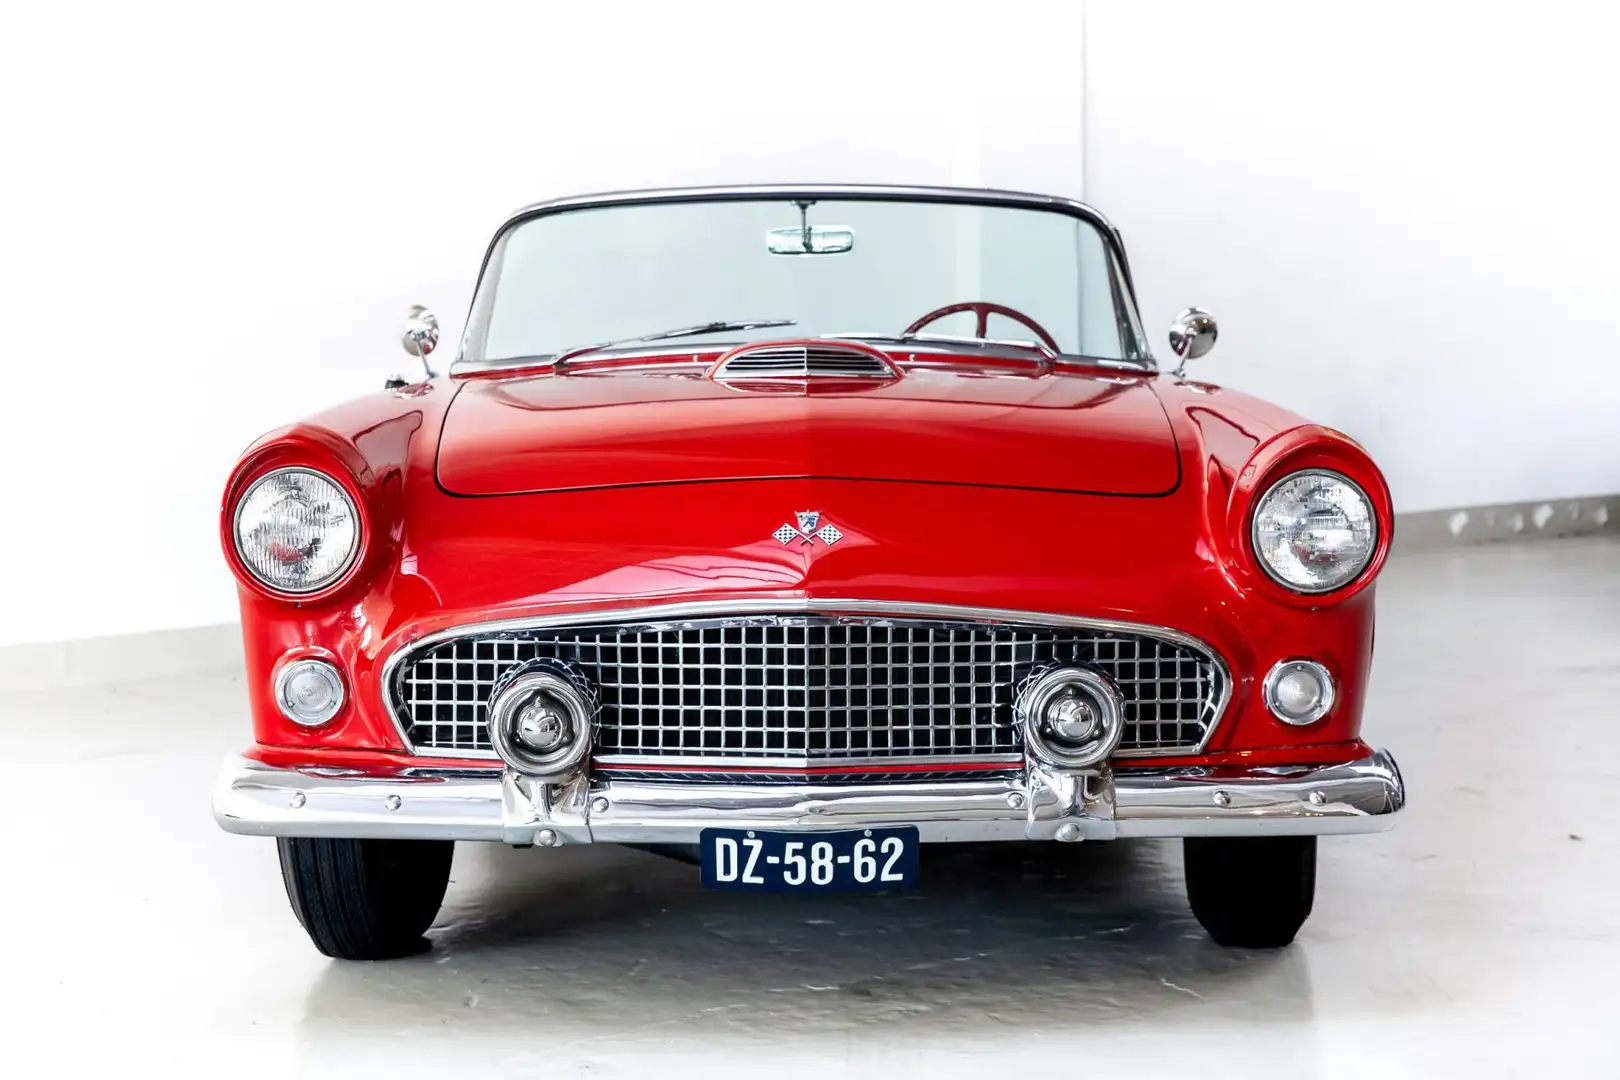 Ford Thunderbird - Y Block V8 - Collectors Car Rouge - 2